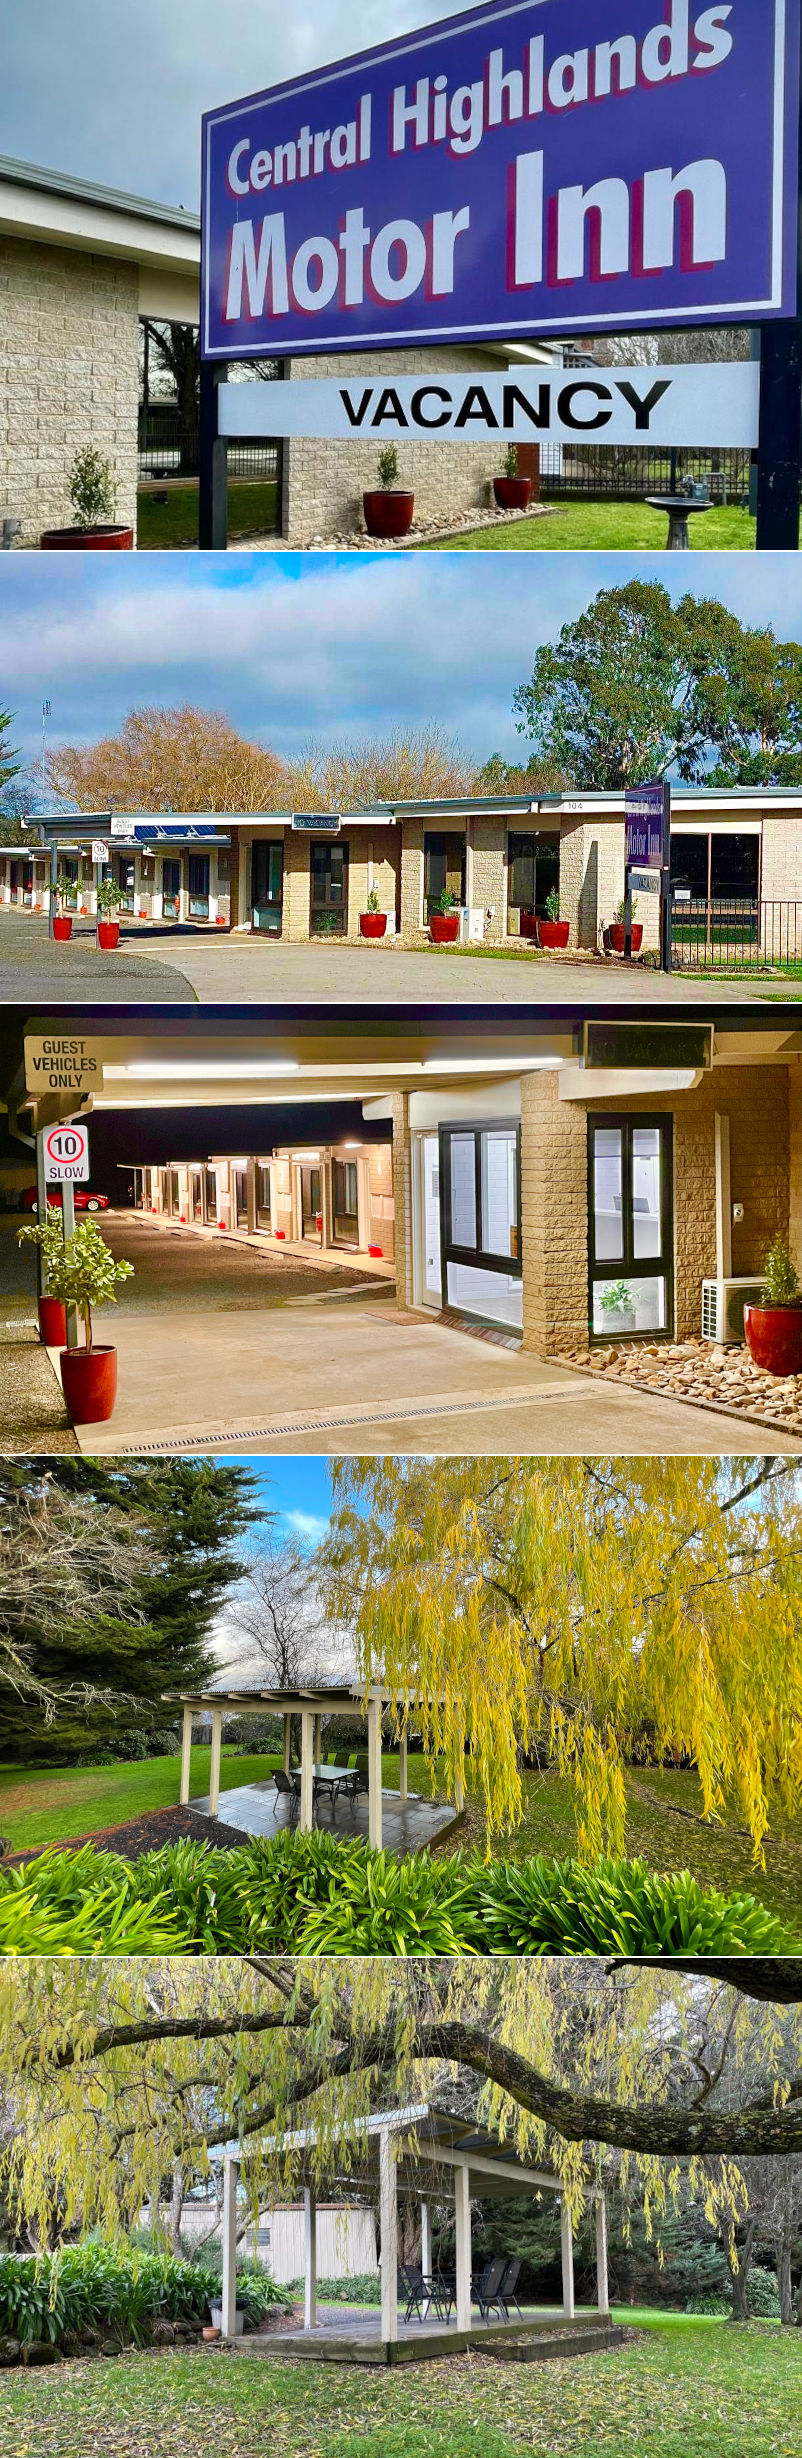 Central Highlands Motor Inn - Grounds and facilities